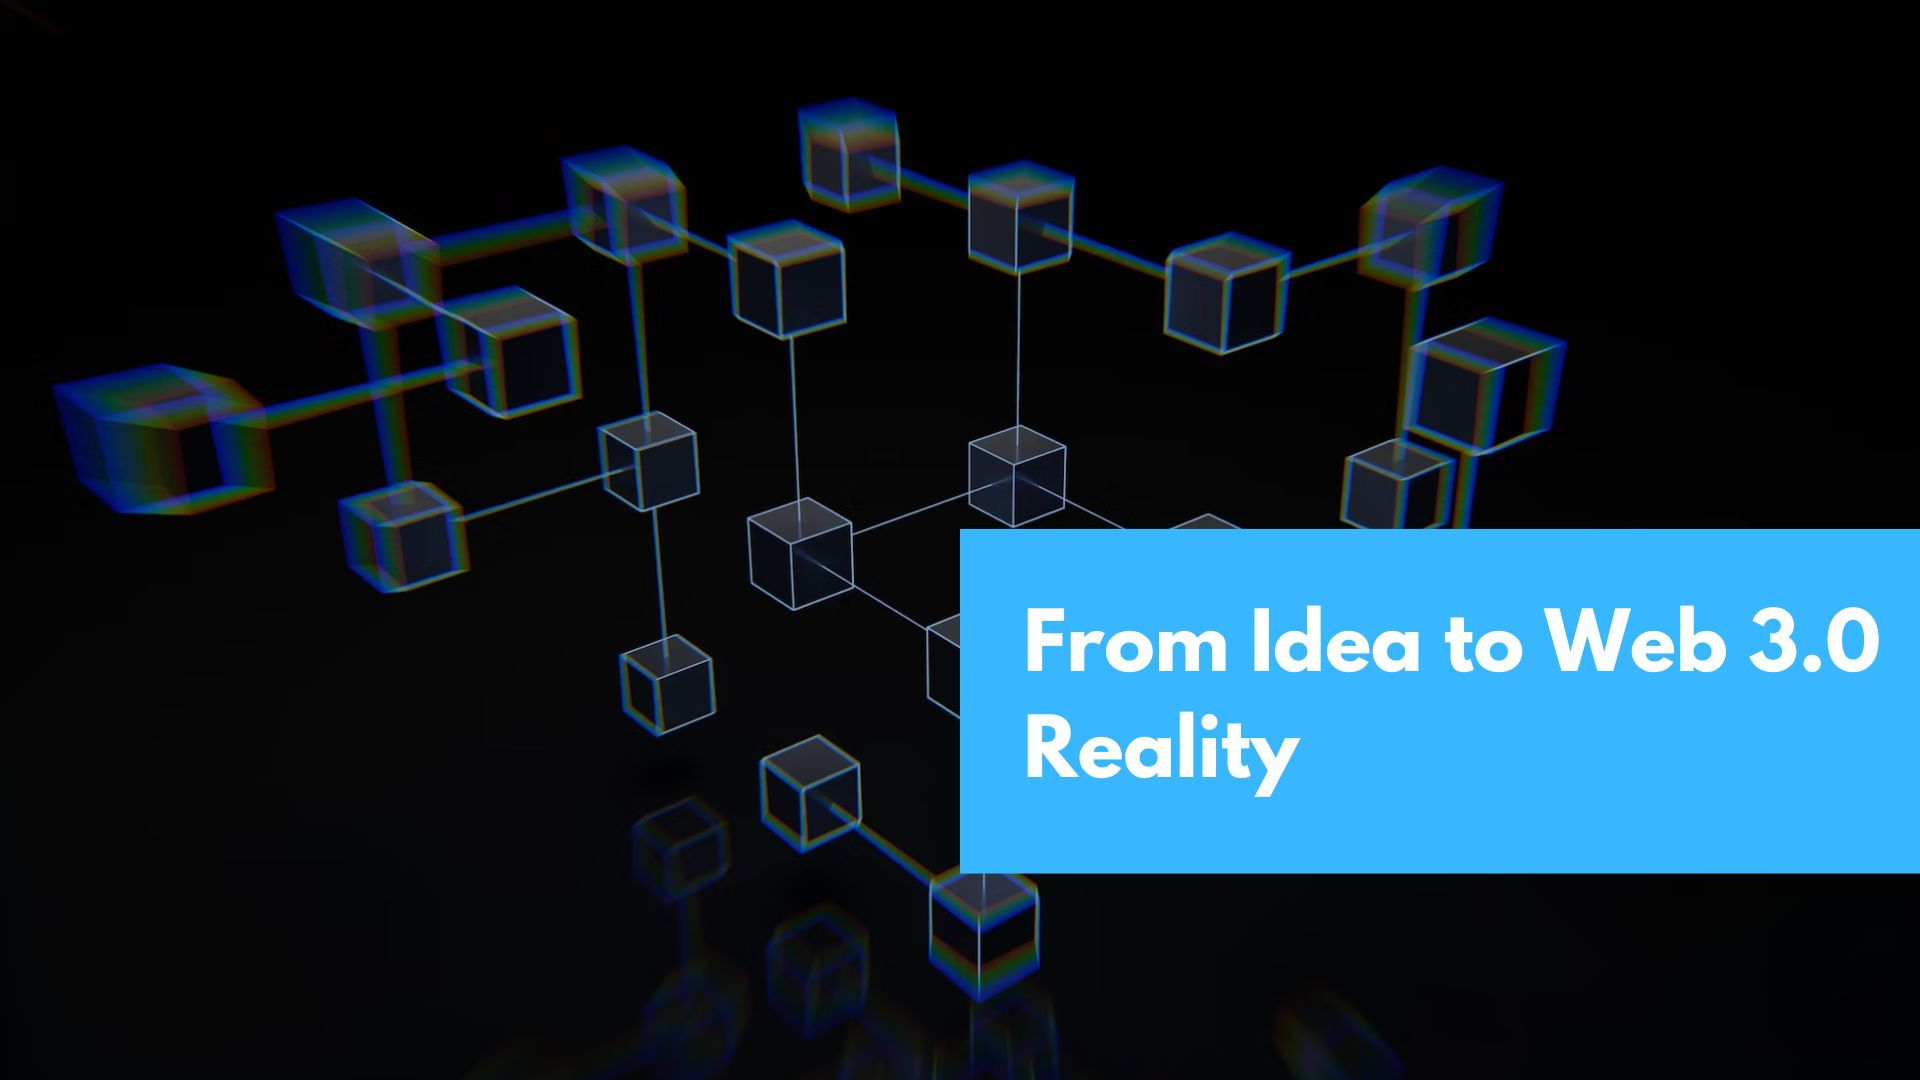 From Idea to Web 3.0 Reality